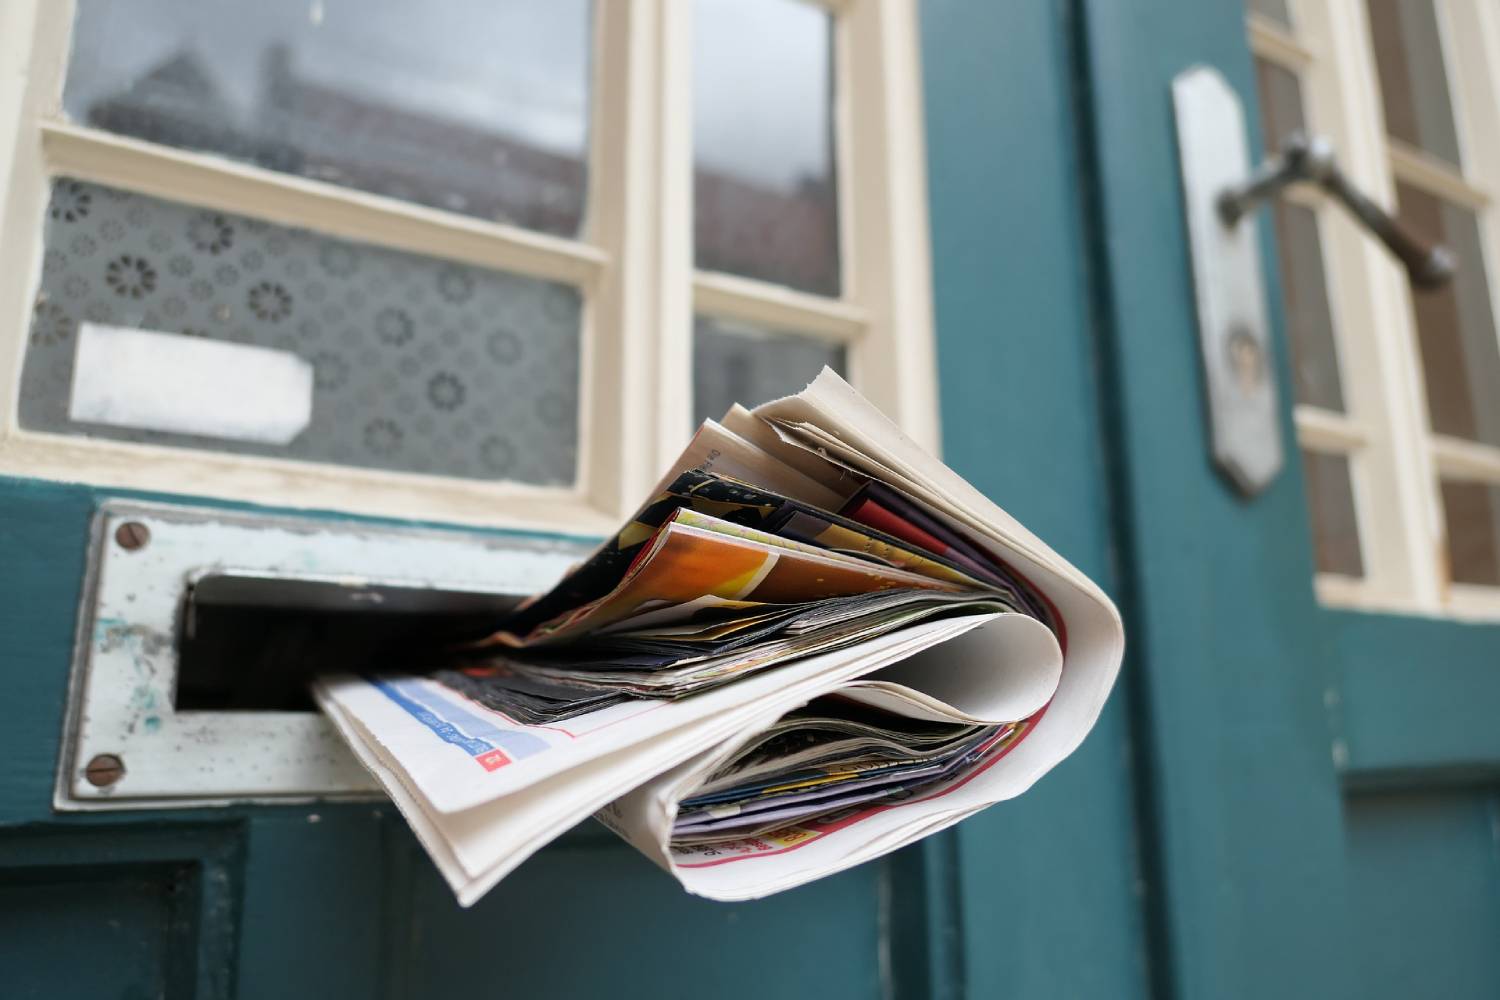 A magazine sticking out of a mail slot in a green door with glass window panes.